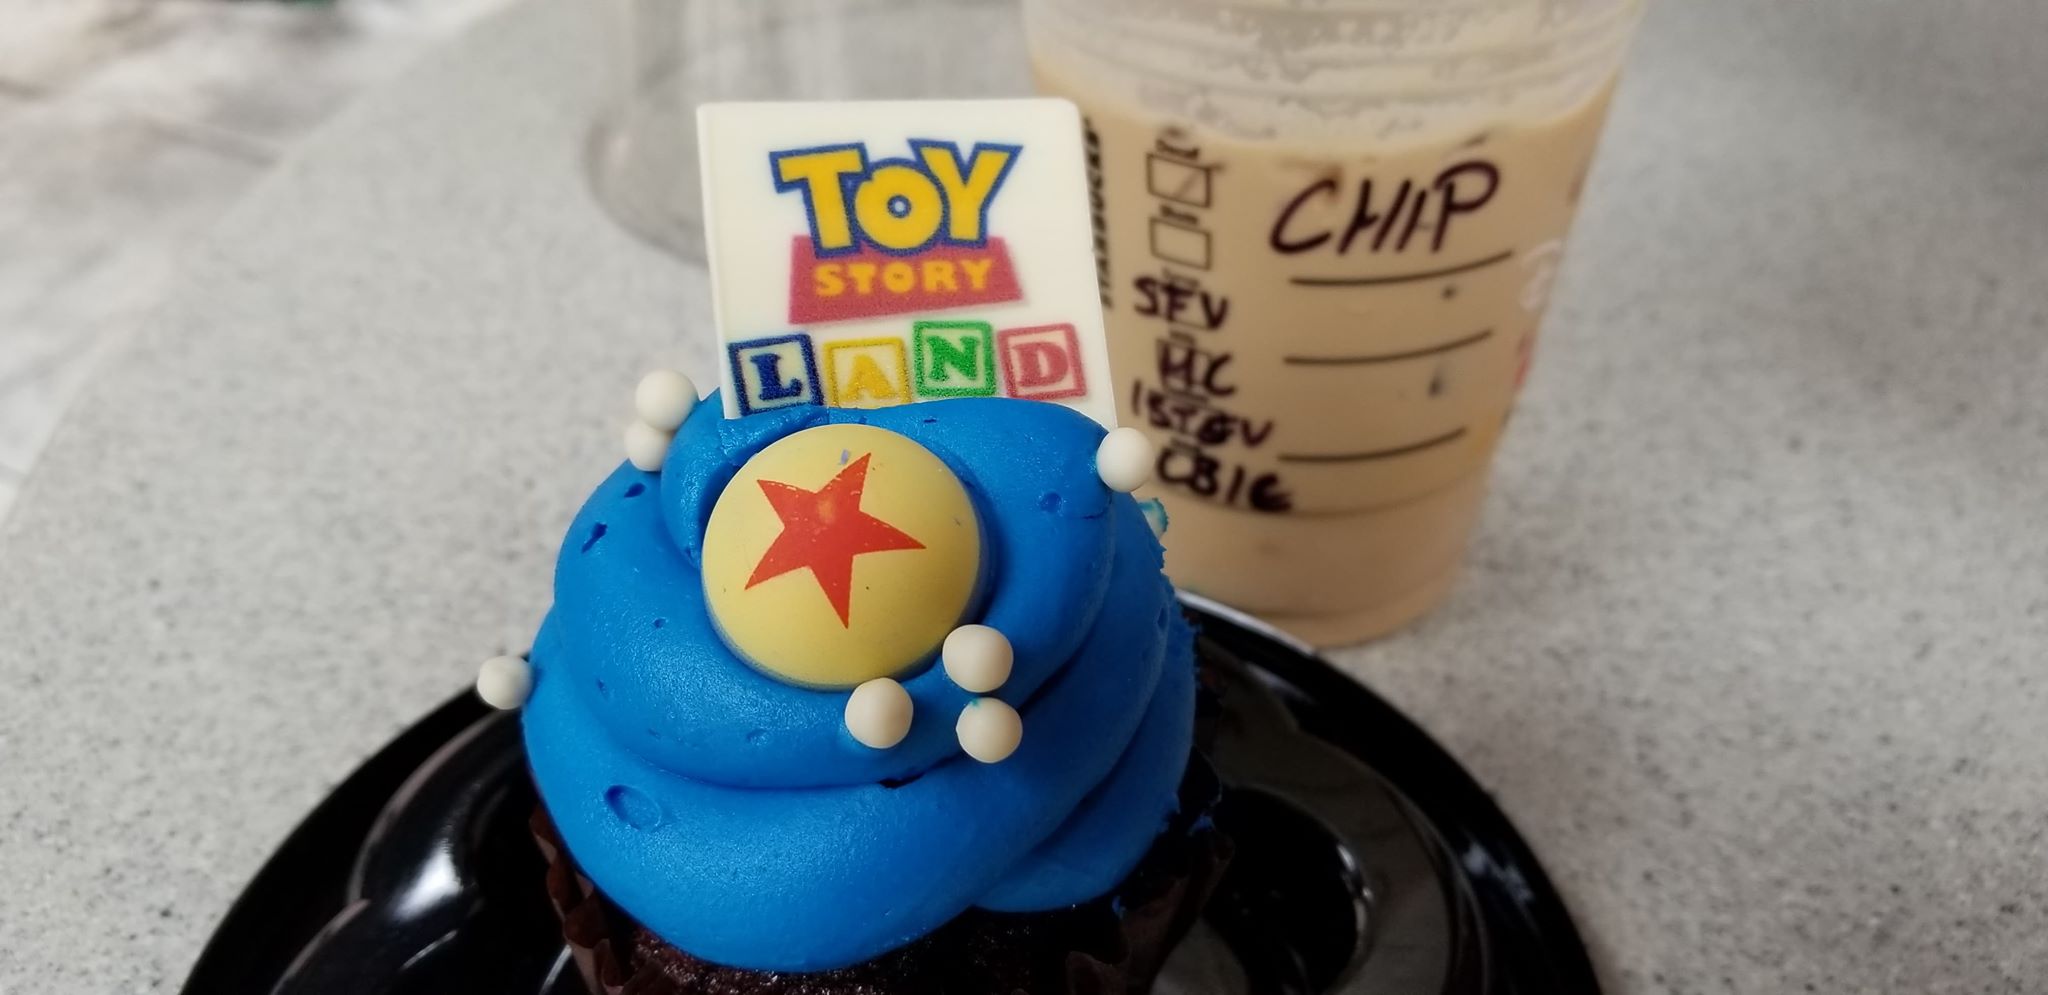 Celebrate the Opening of Toy Story Land with A Delicious Toy Story-themed Cupcake!